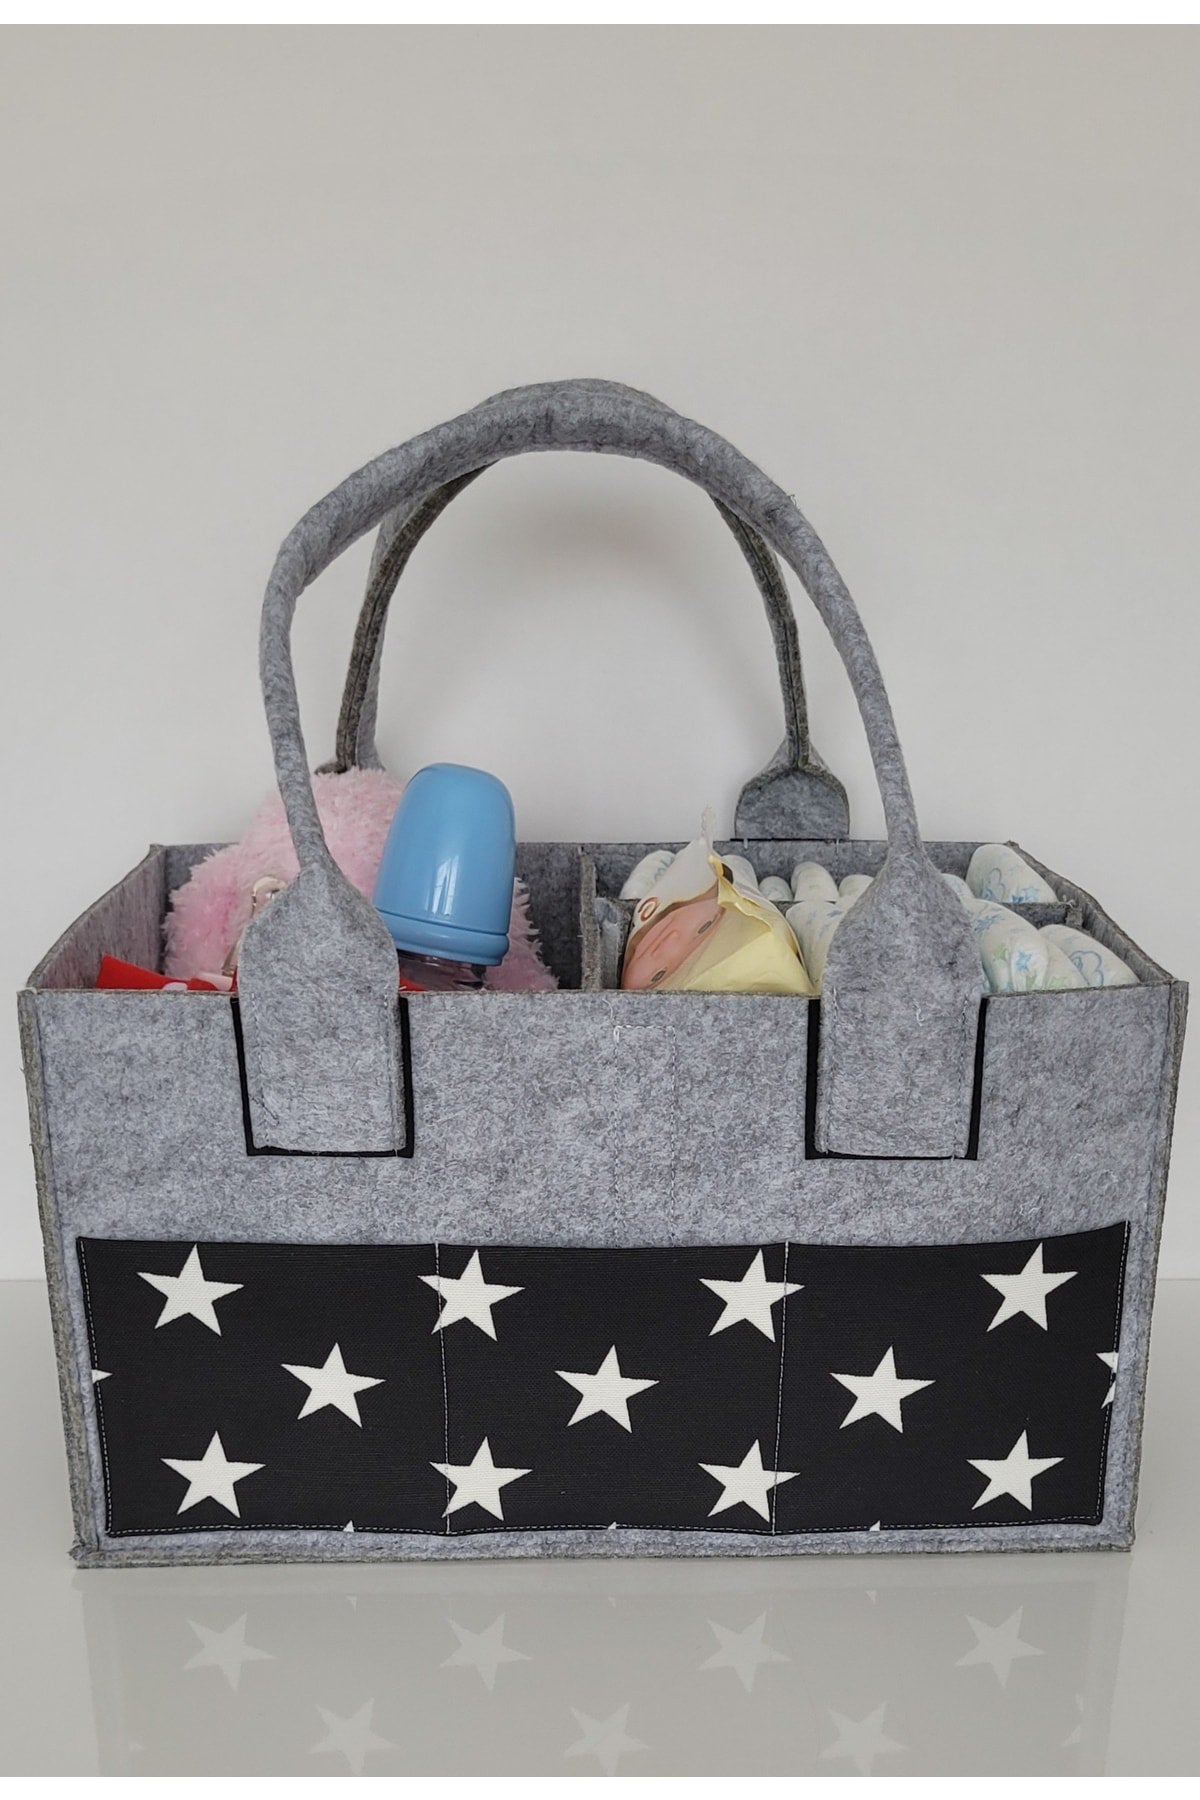 Handmade Multi-Purpose Felt Mother Baby Care And Organizer Bag Functional Organizer With Lid